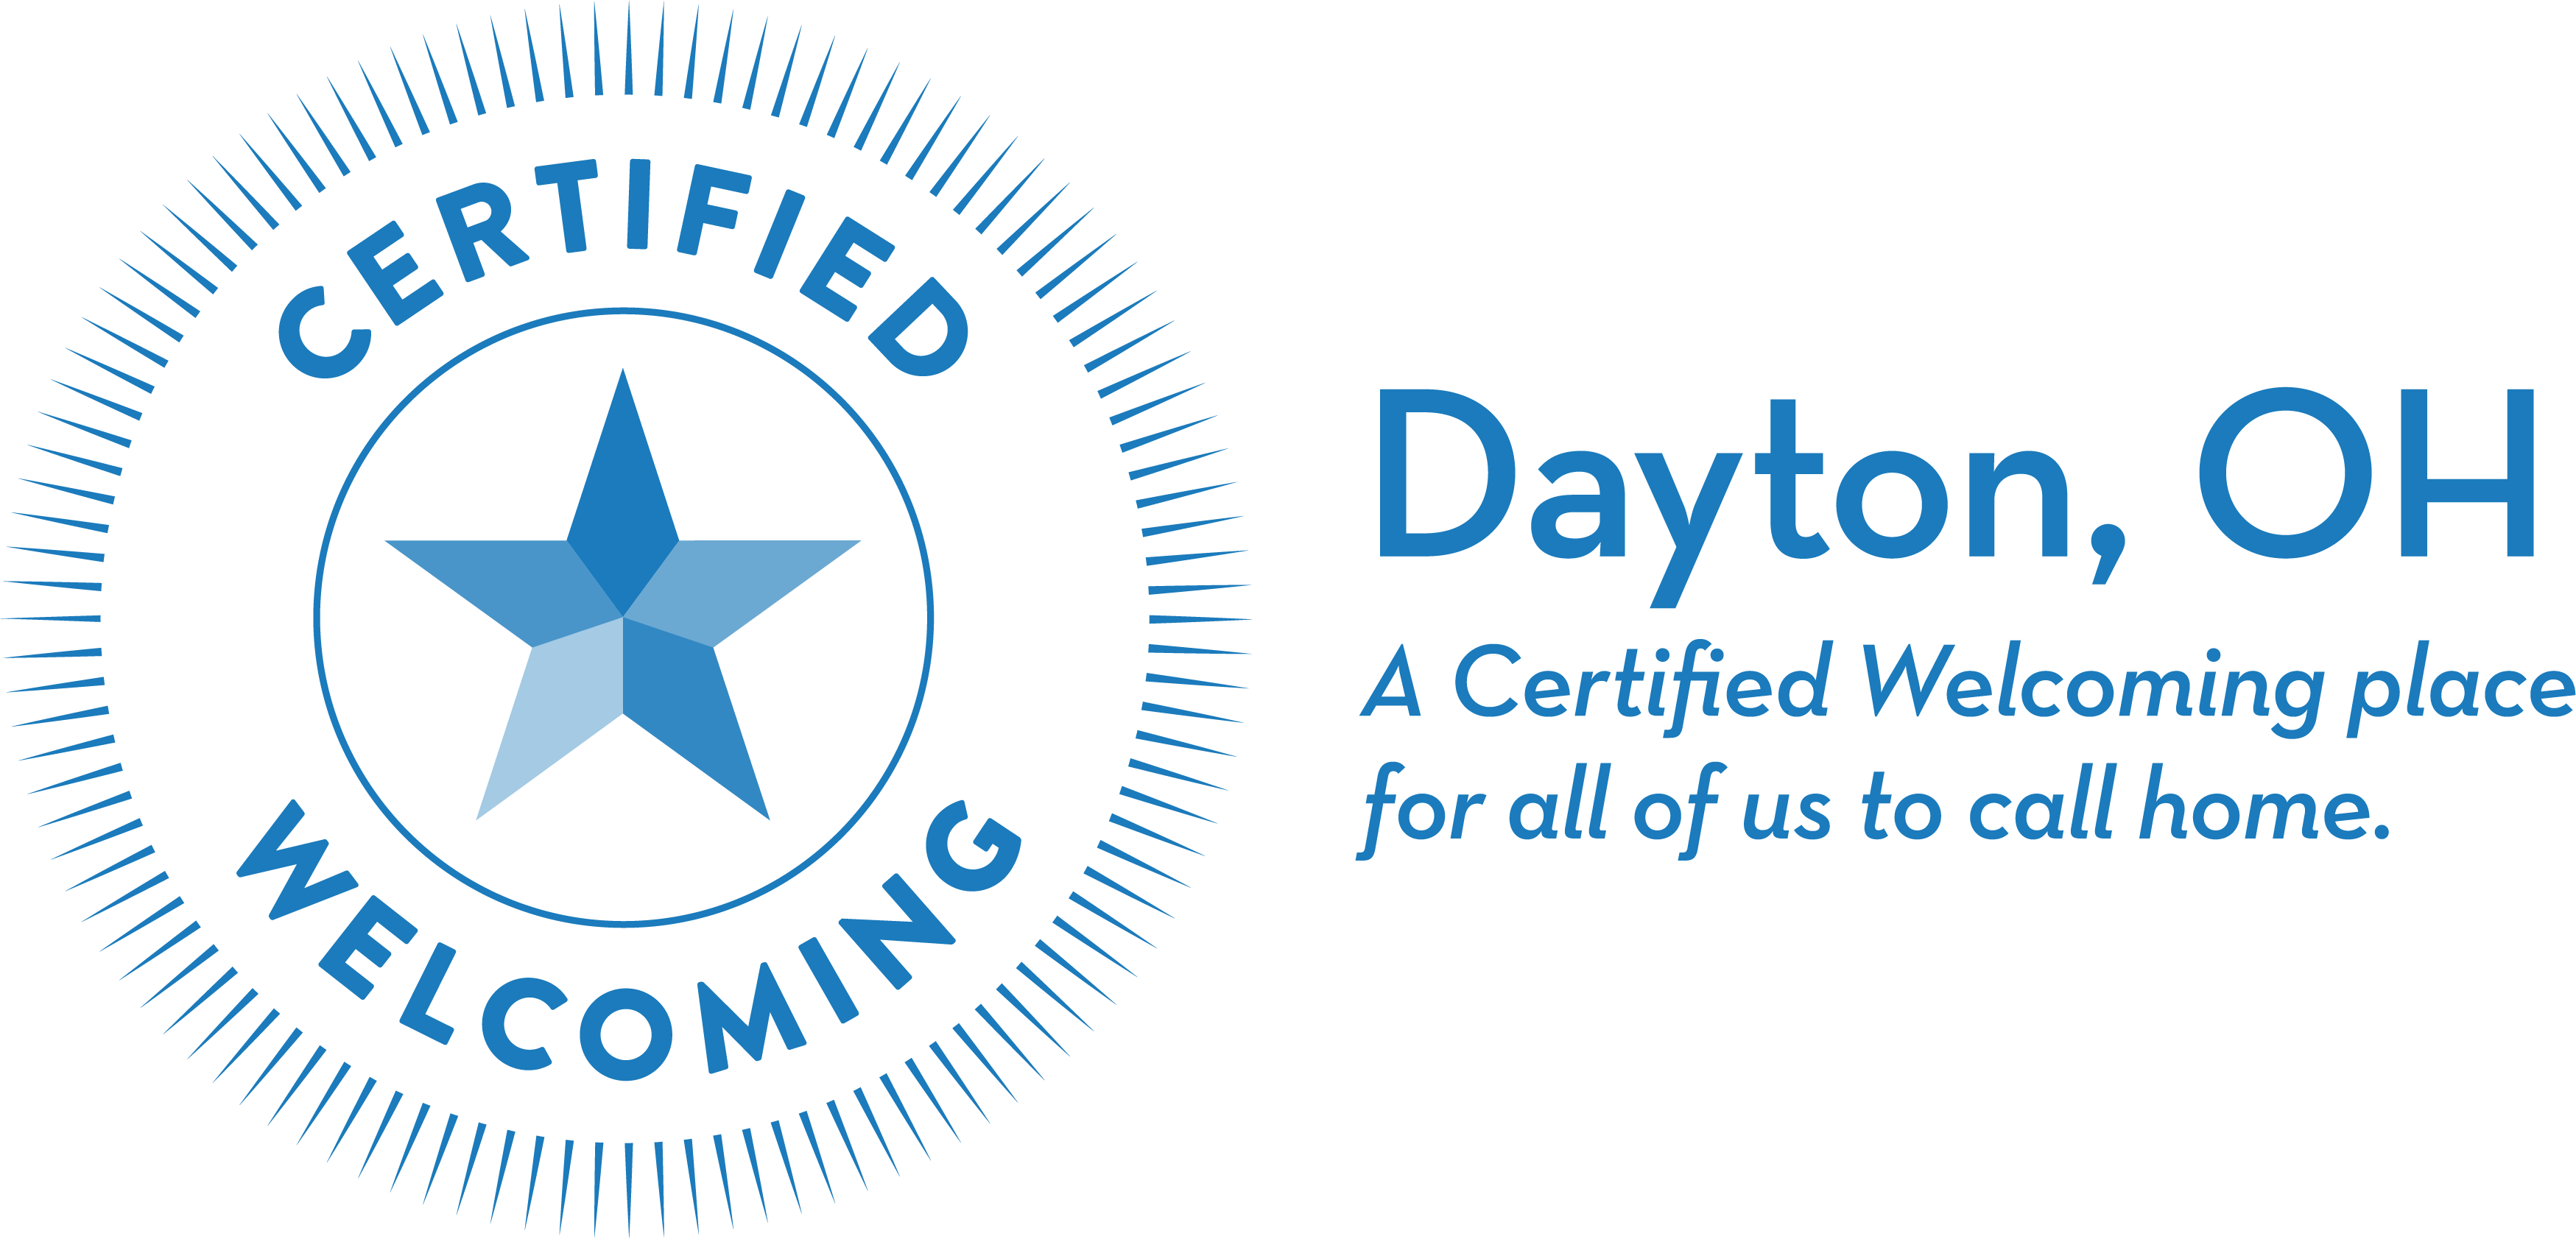 Certified Welcoming - Dayton, OH; A Certified Welcoming place for all of us to call home.